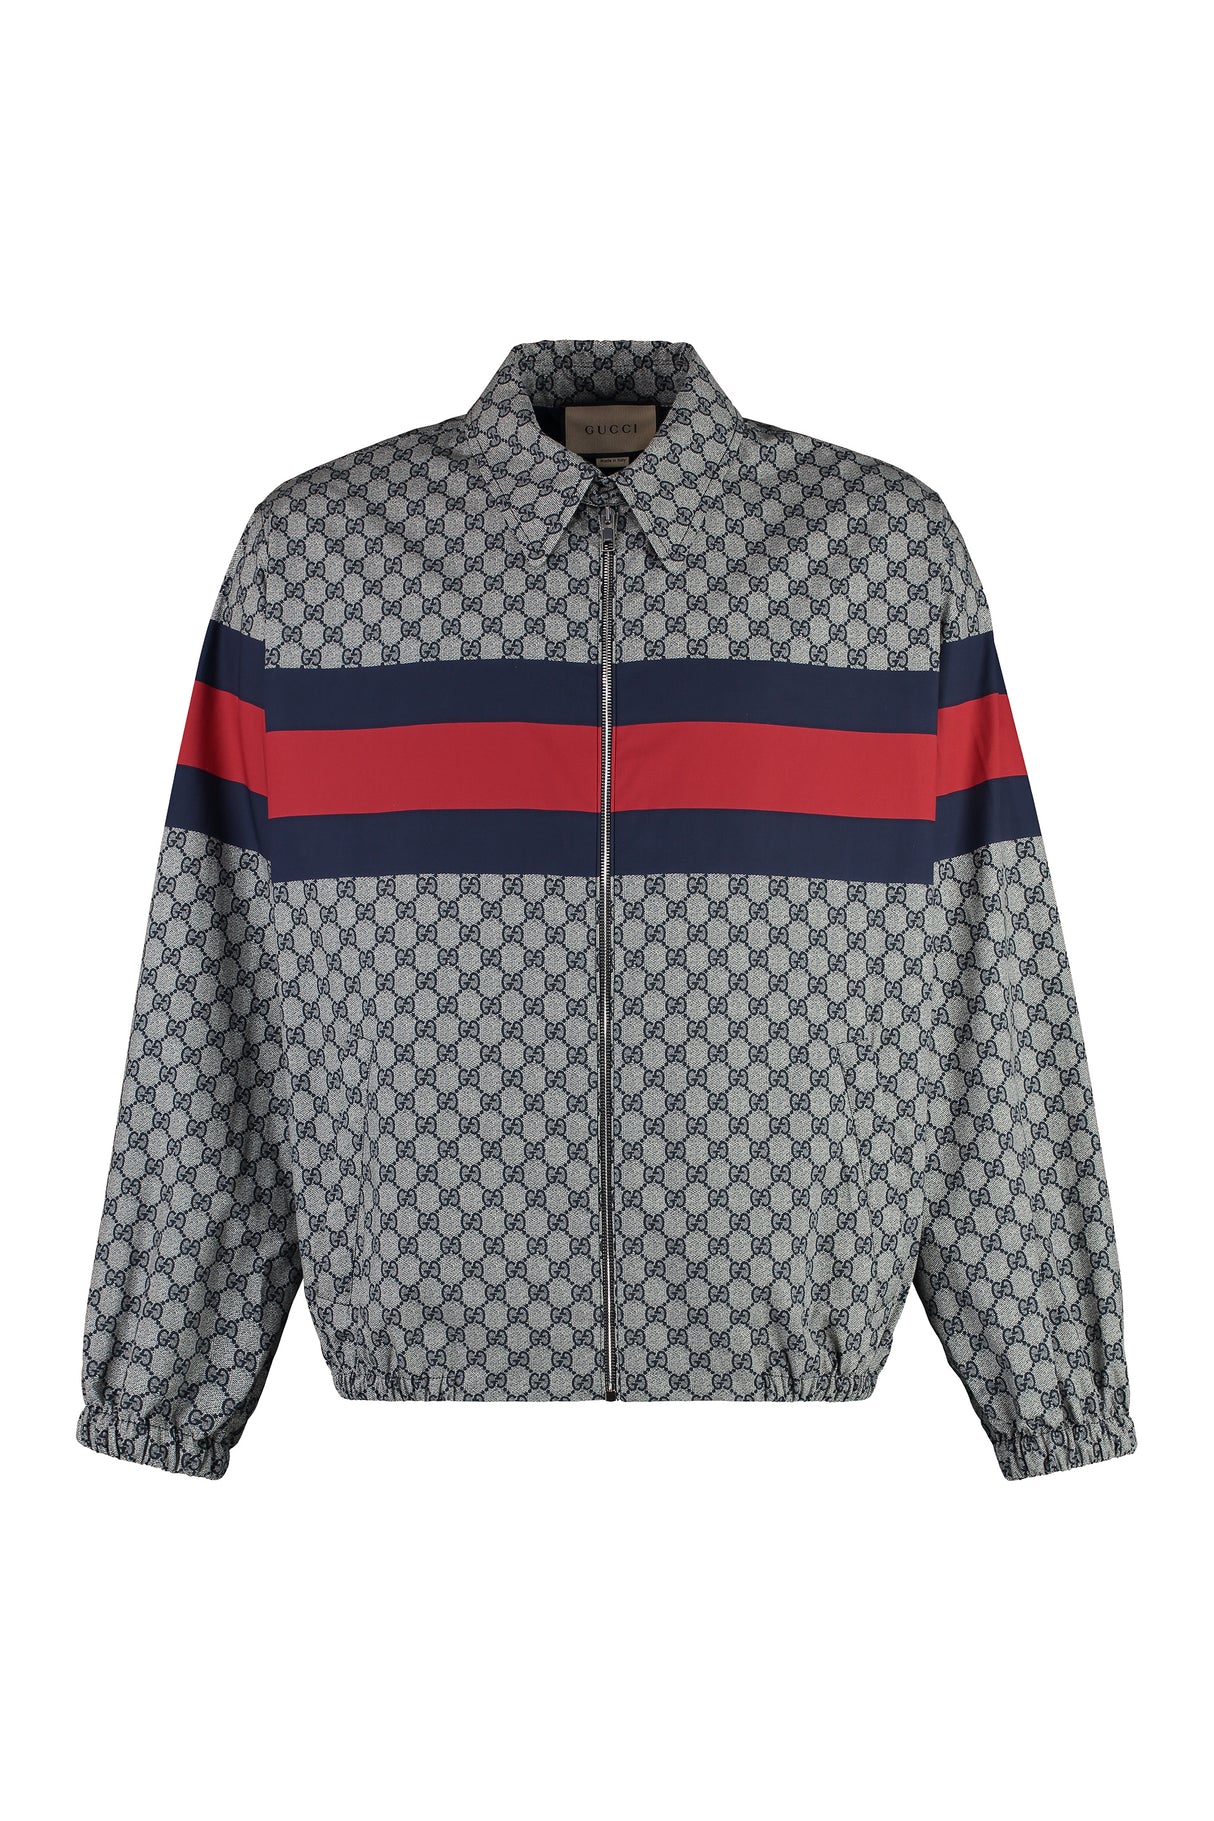 GUCCI Blue Cotton Zippered Jacket for Men - SS24 Collection